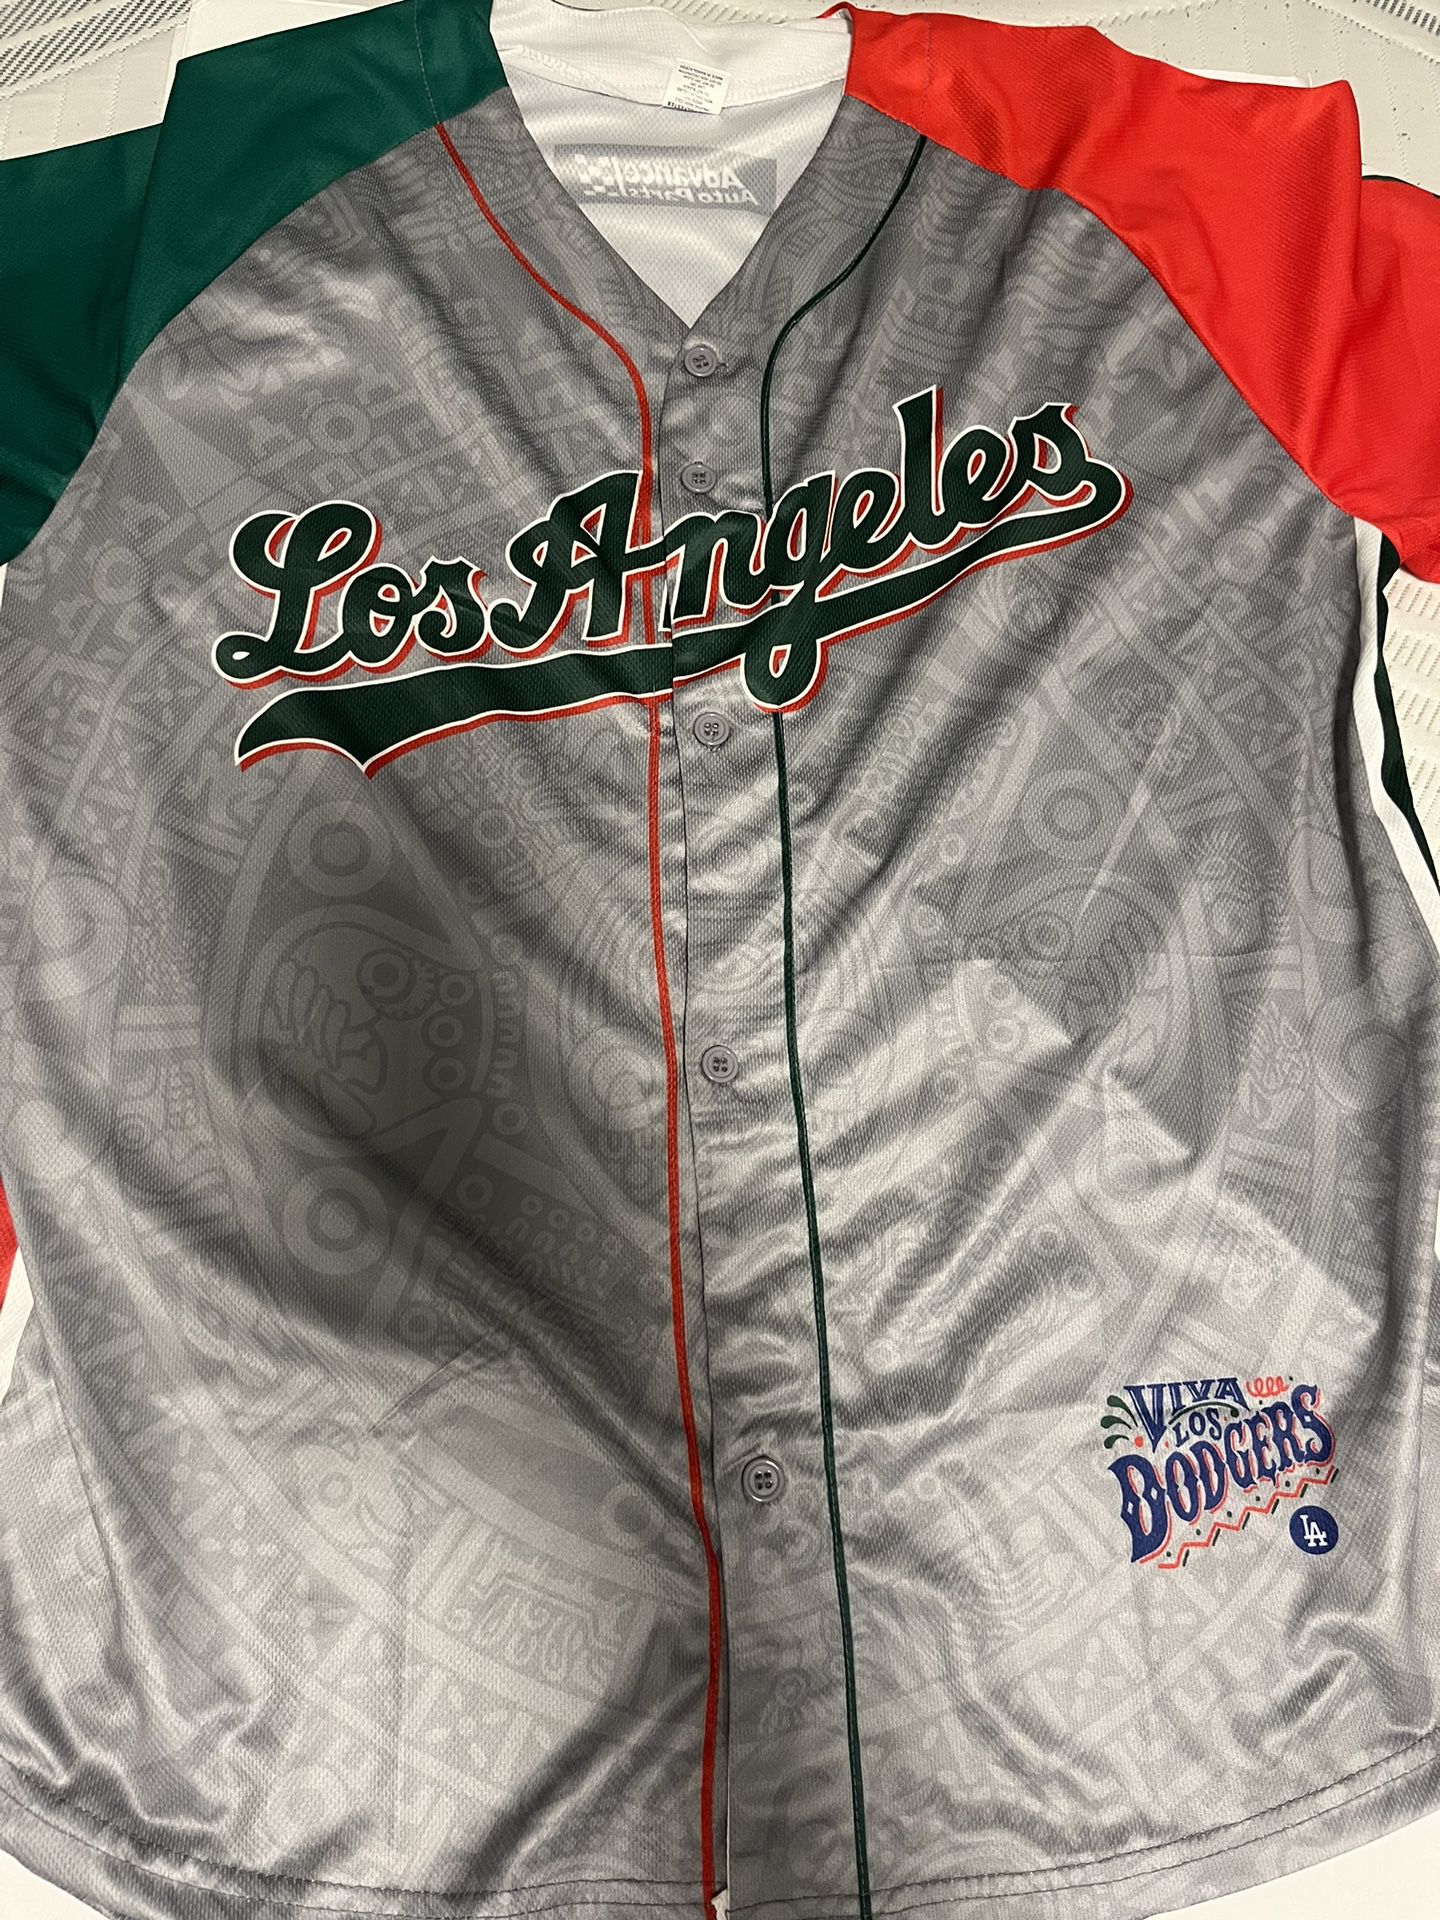 Dodgers Mexico Jersey